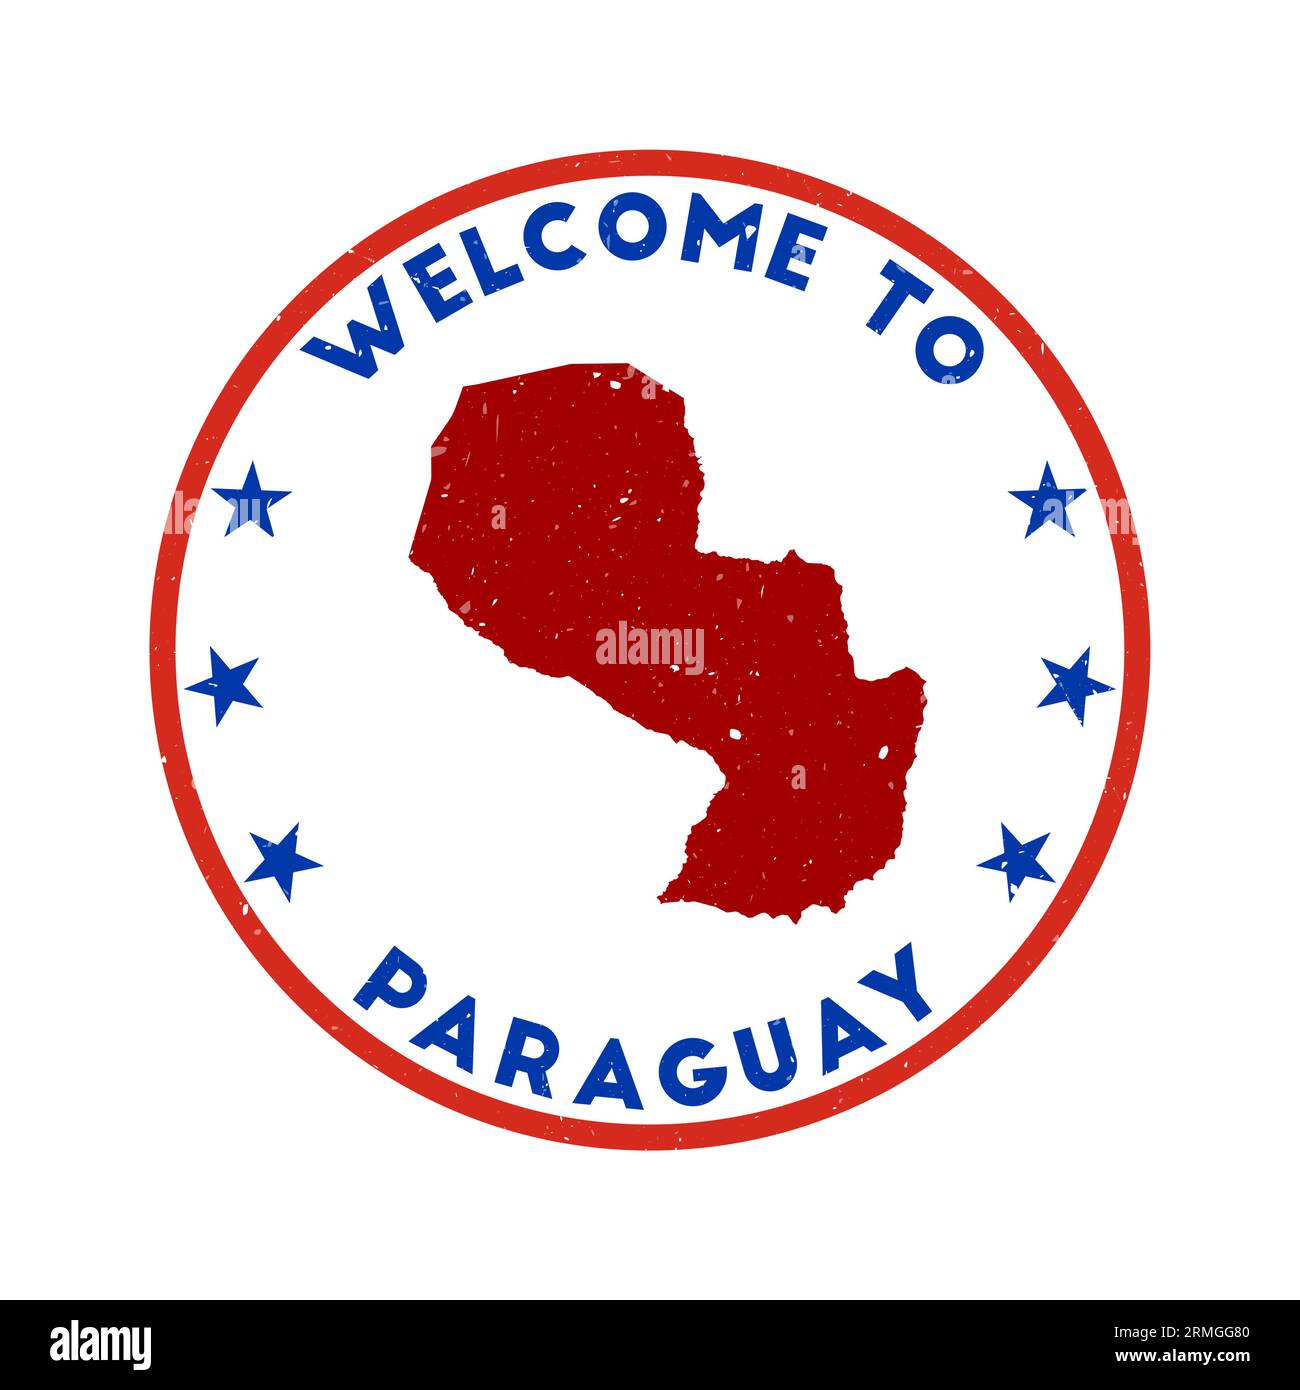 Welcome to Paraguay stamp. Grunge country round stamp with texture in Blue Hour color theme. Vintage style geometric Paraguay seal. Trendy vector illu Stock Vector